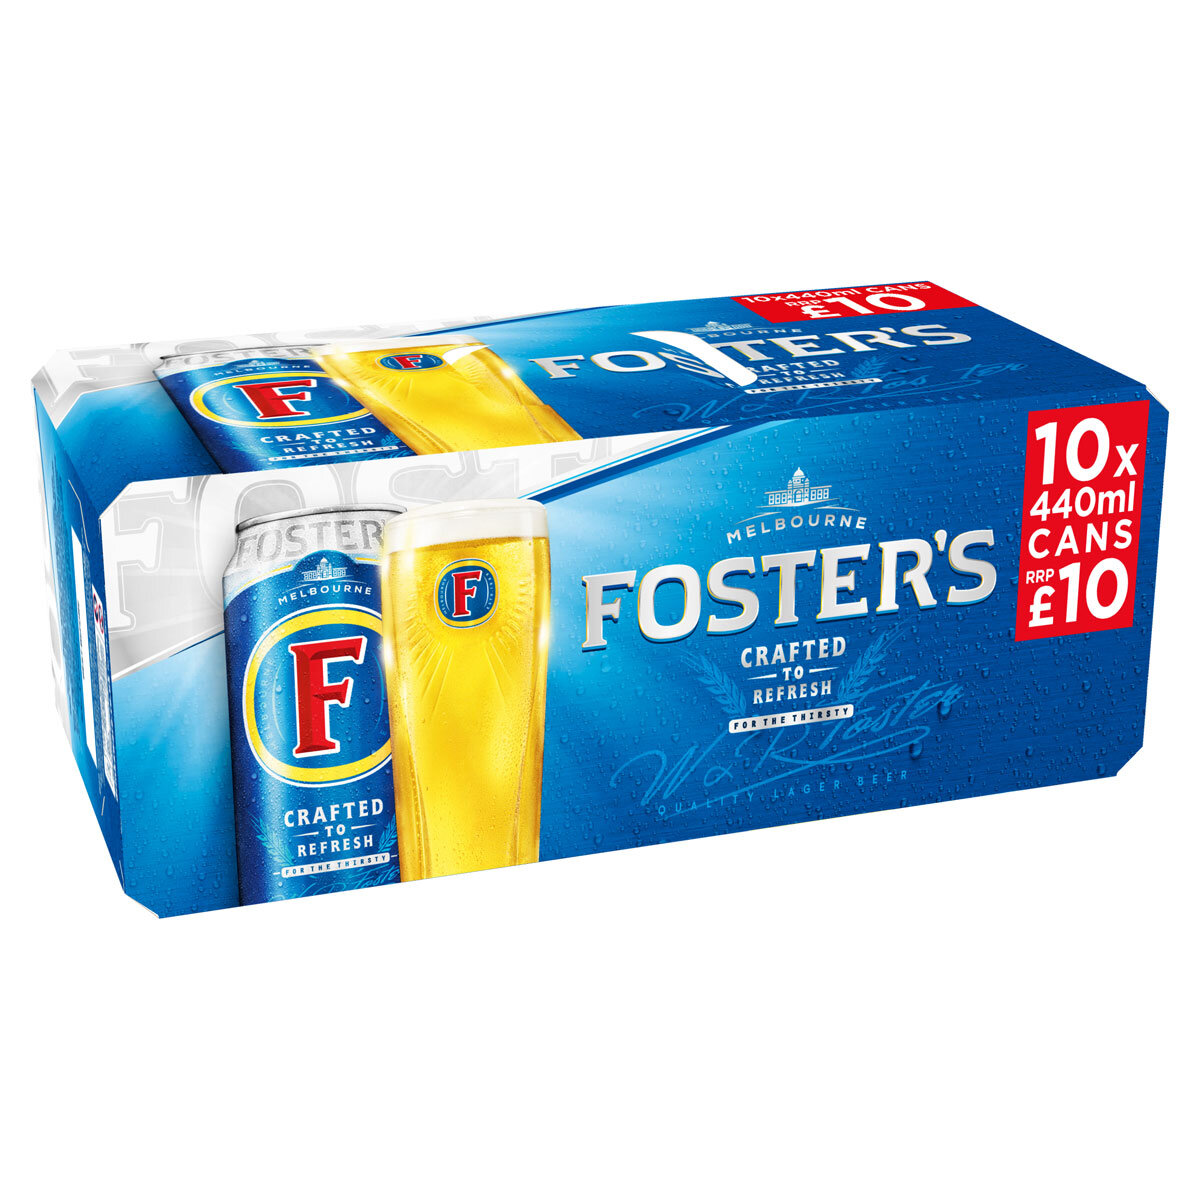 Fosters 10 x 440ml Cans